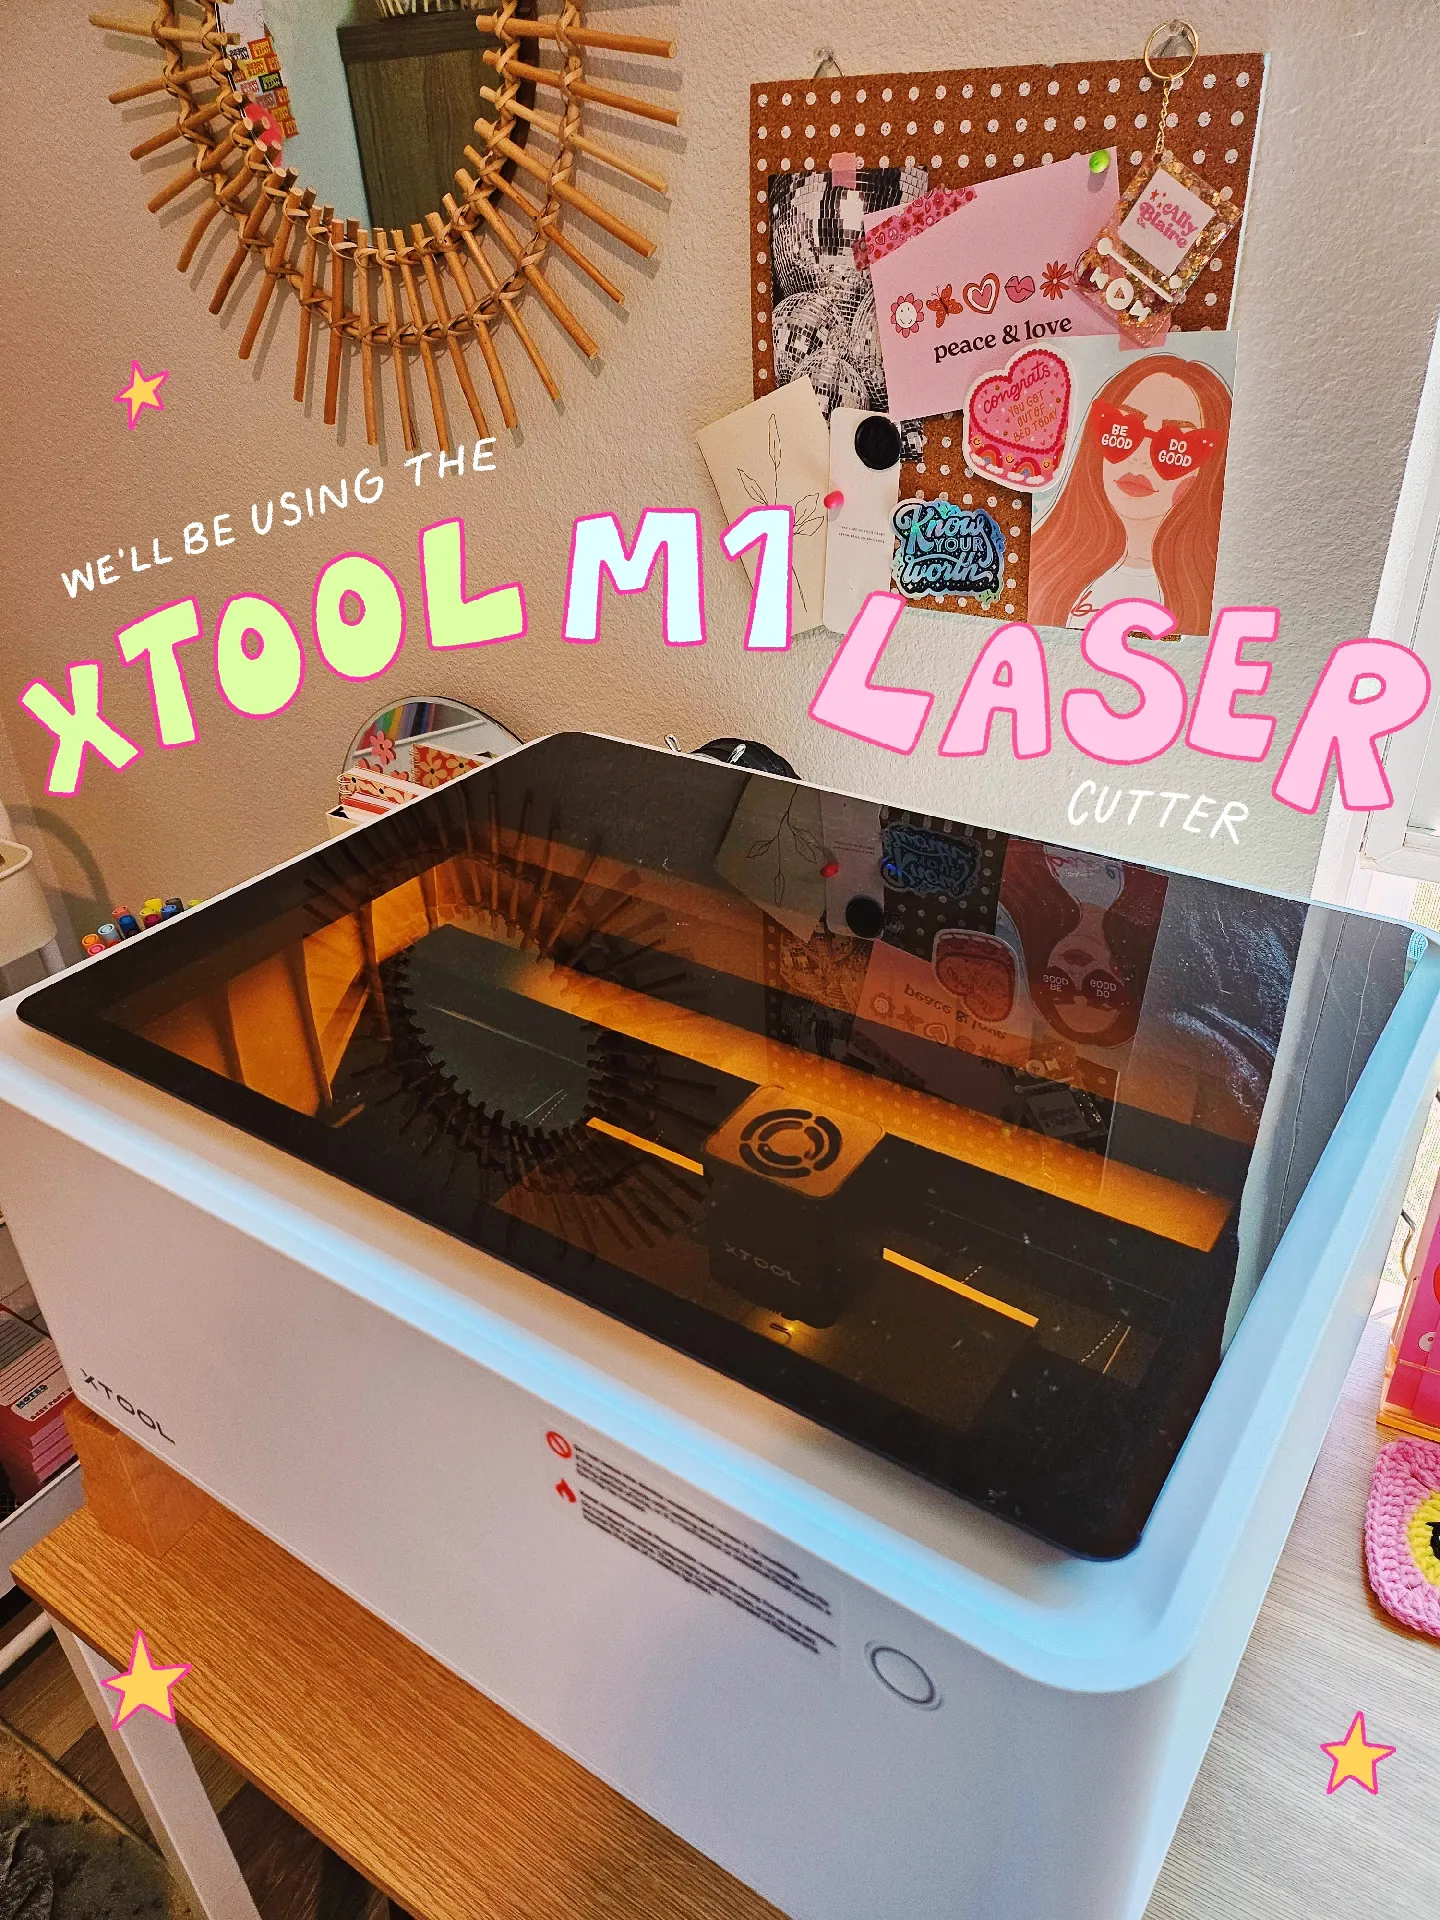 Why I Love My New xTool M1 Laser Cutter - MY 100 YEAR OLD HOME